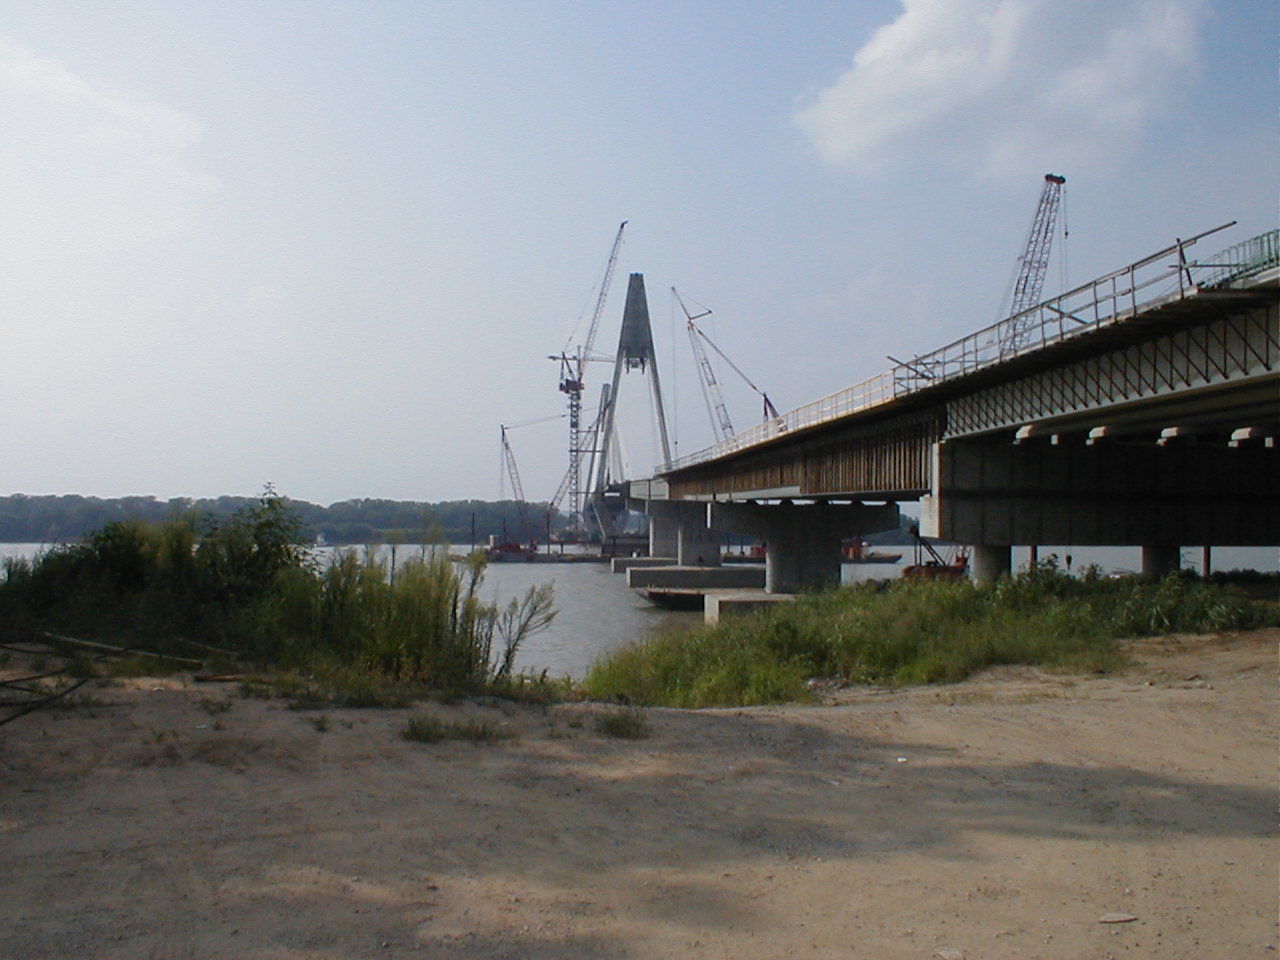 The bridge viewed from the Kentucky bank of the Ohio River.